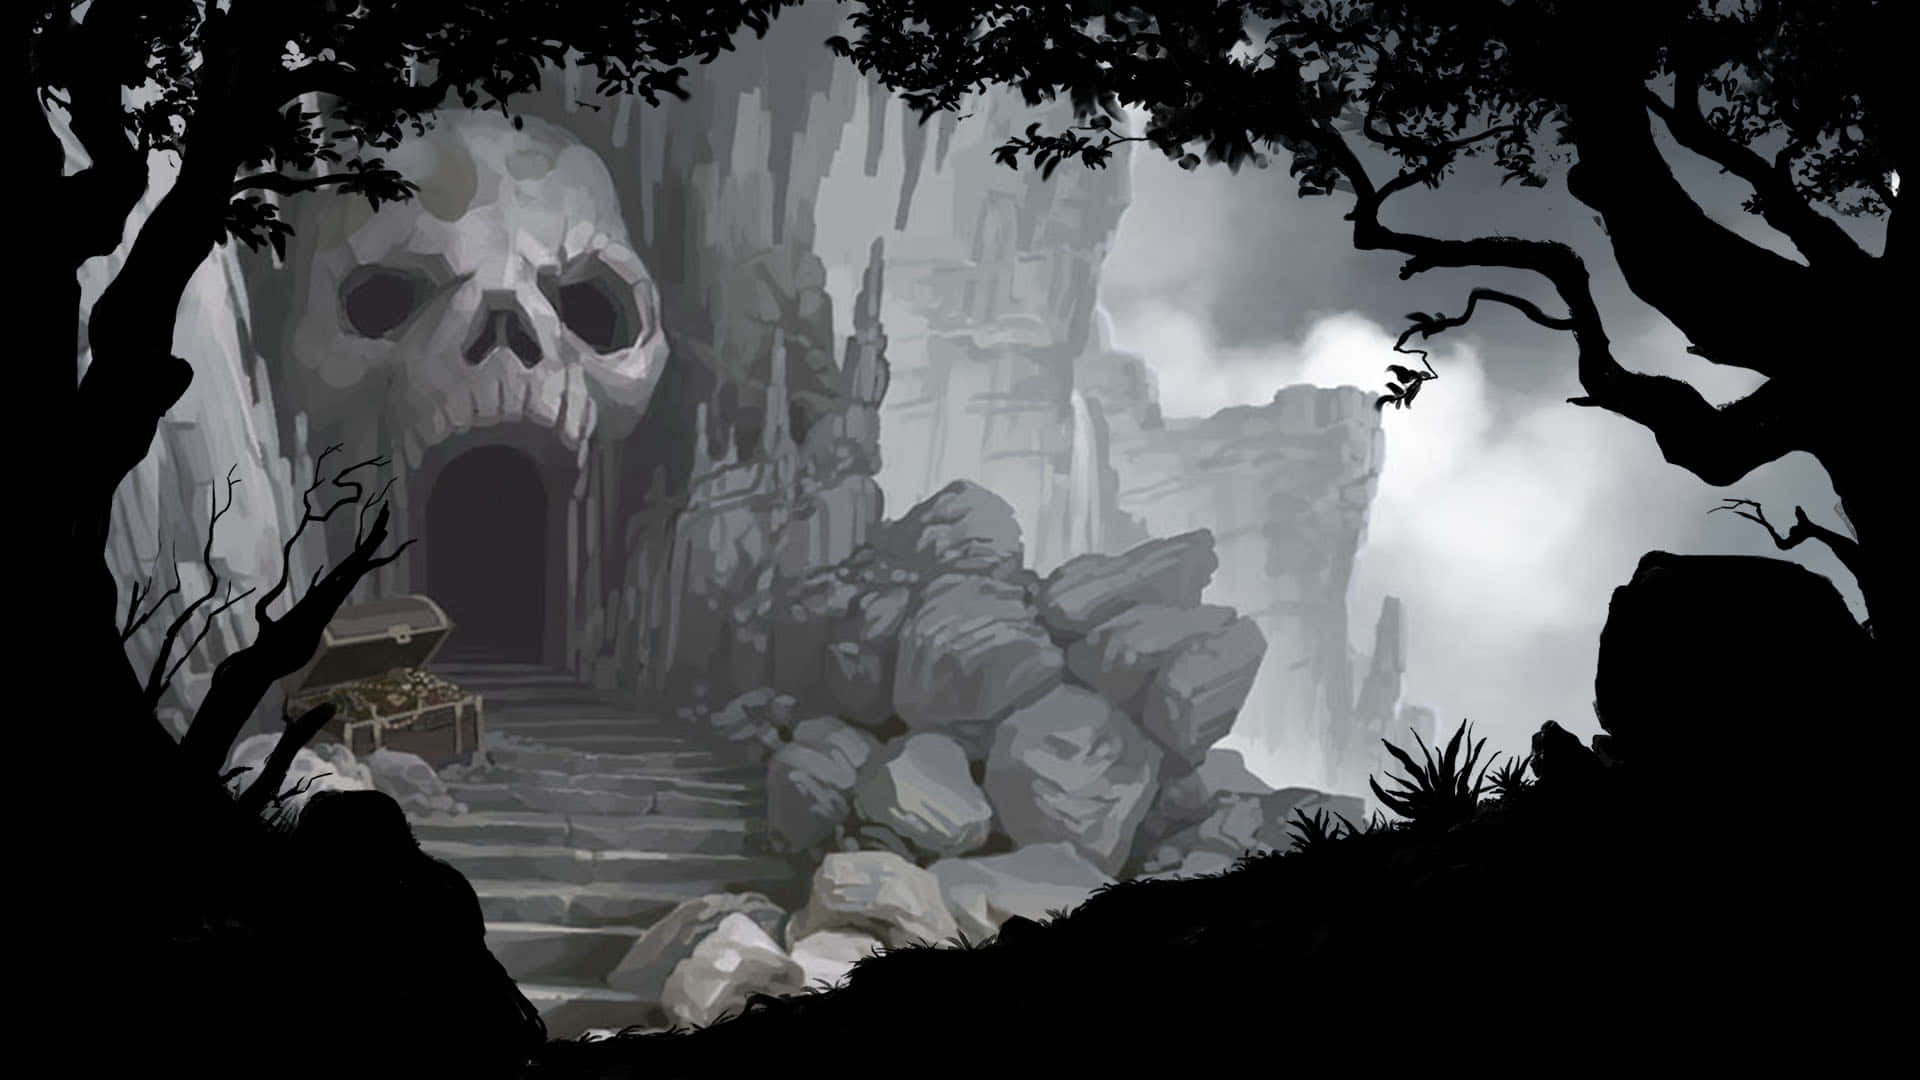 A Dark Scene With A Skull And A Doorway